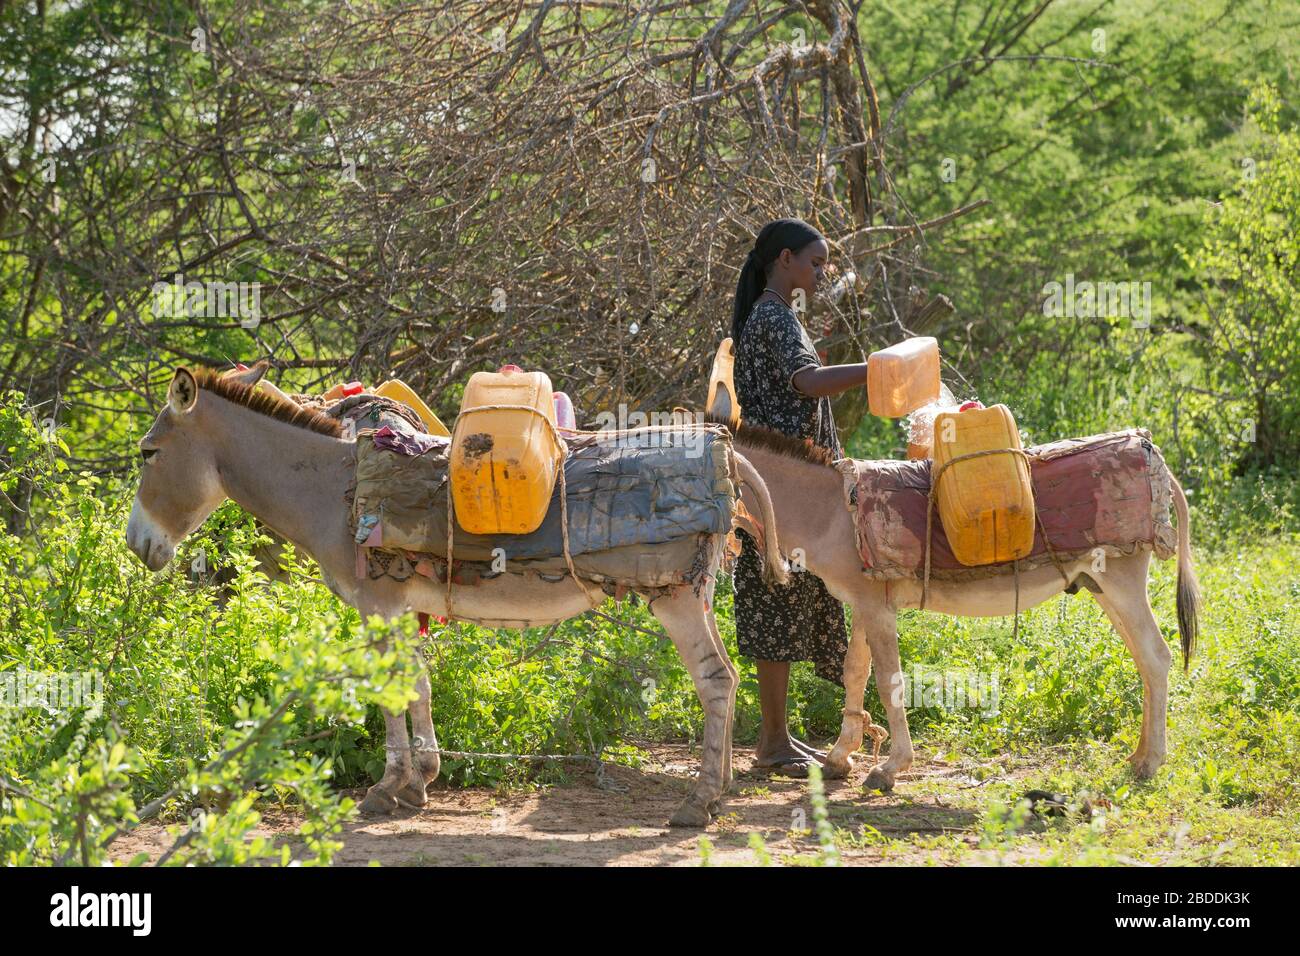 14.11.2019, Gode, Somali Region, Ethiopia - A woman fills water canisters with water carried by donkeys. Project documentation of the relief organisat Stock Photo